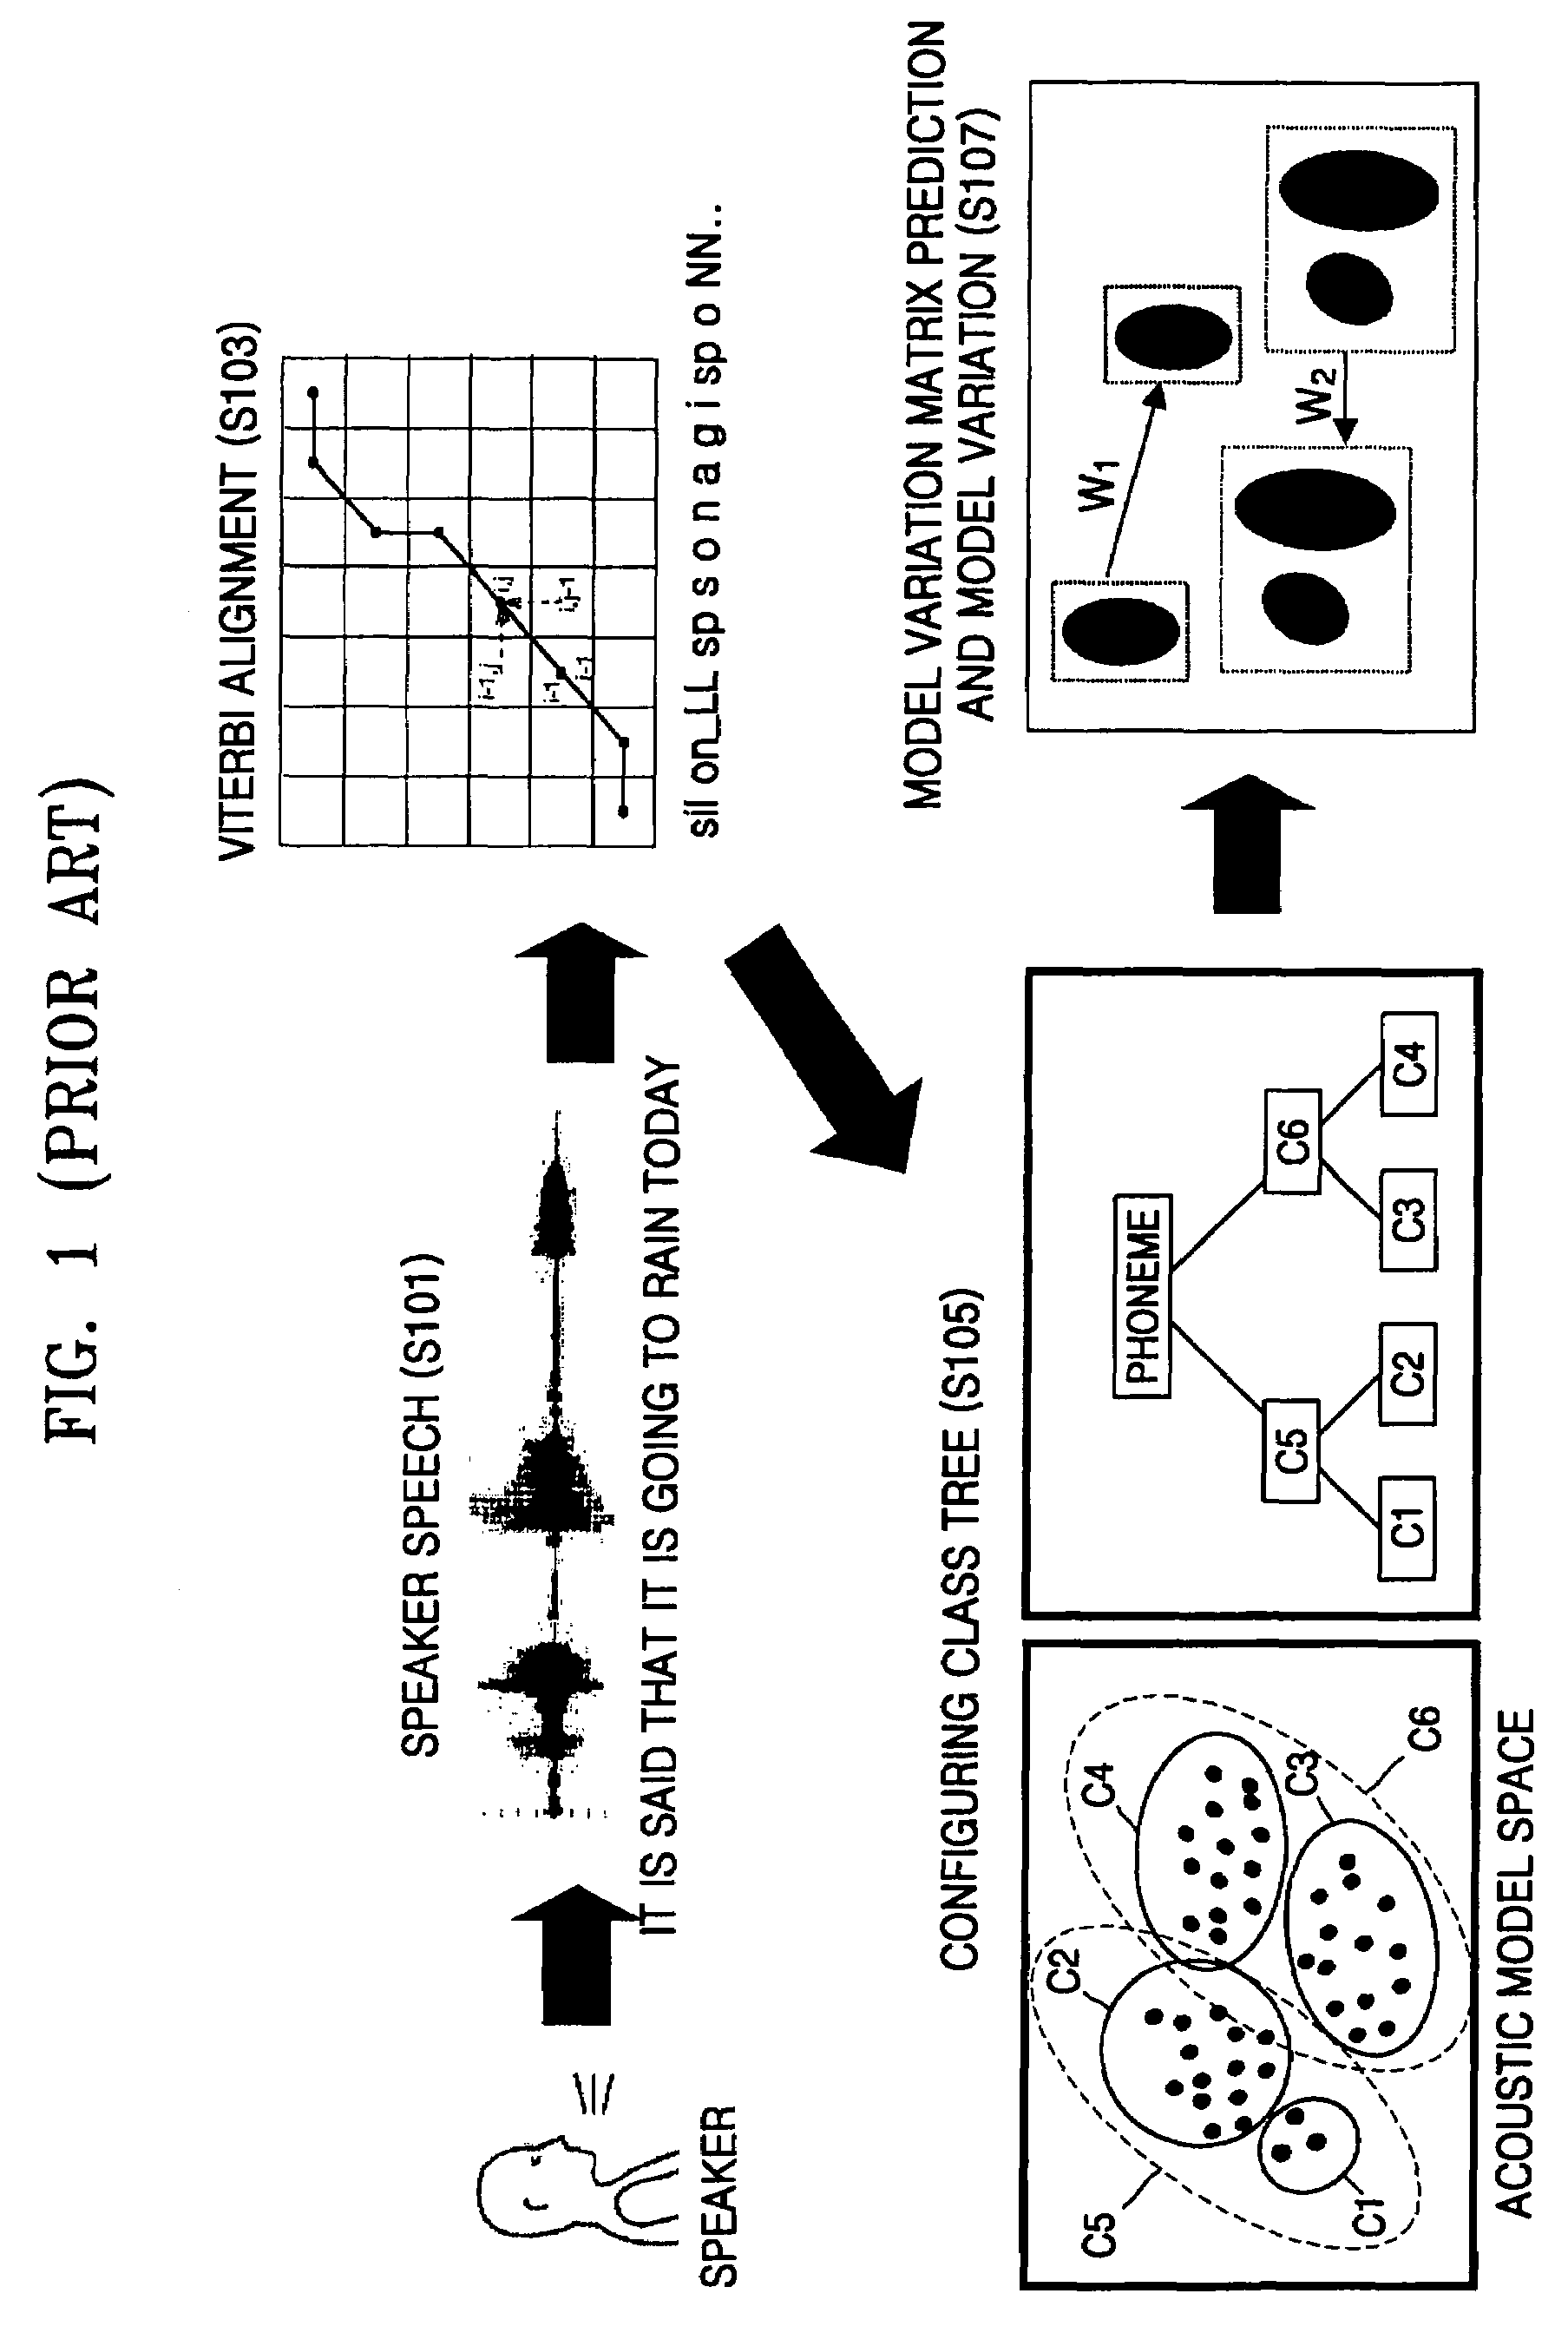 Speaker clustering and adaptation method based on the HMM model variation information and its apparatus for speech recognition